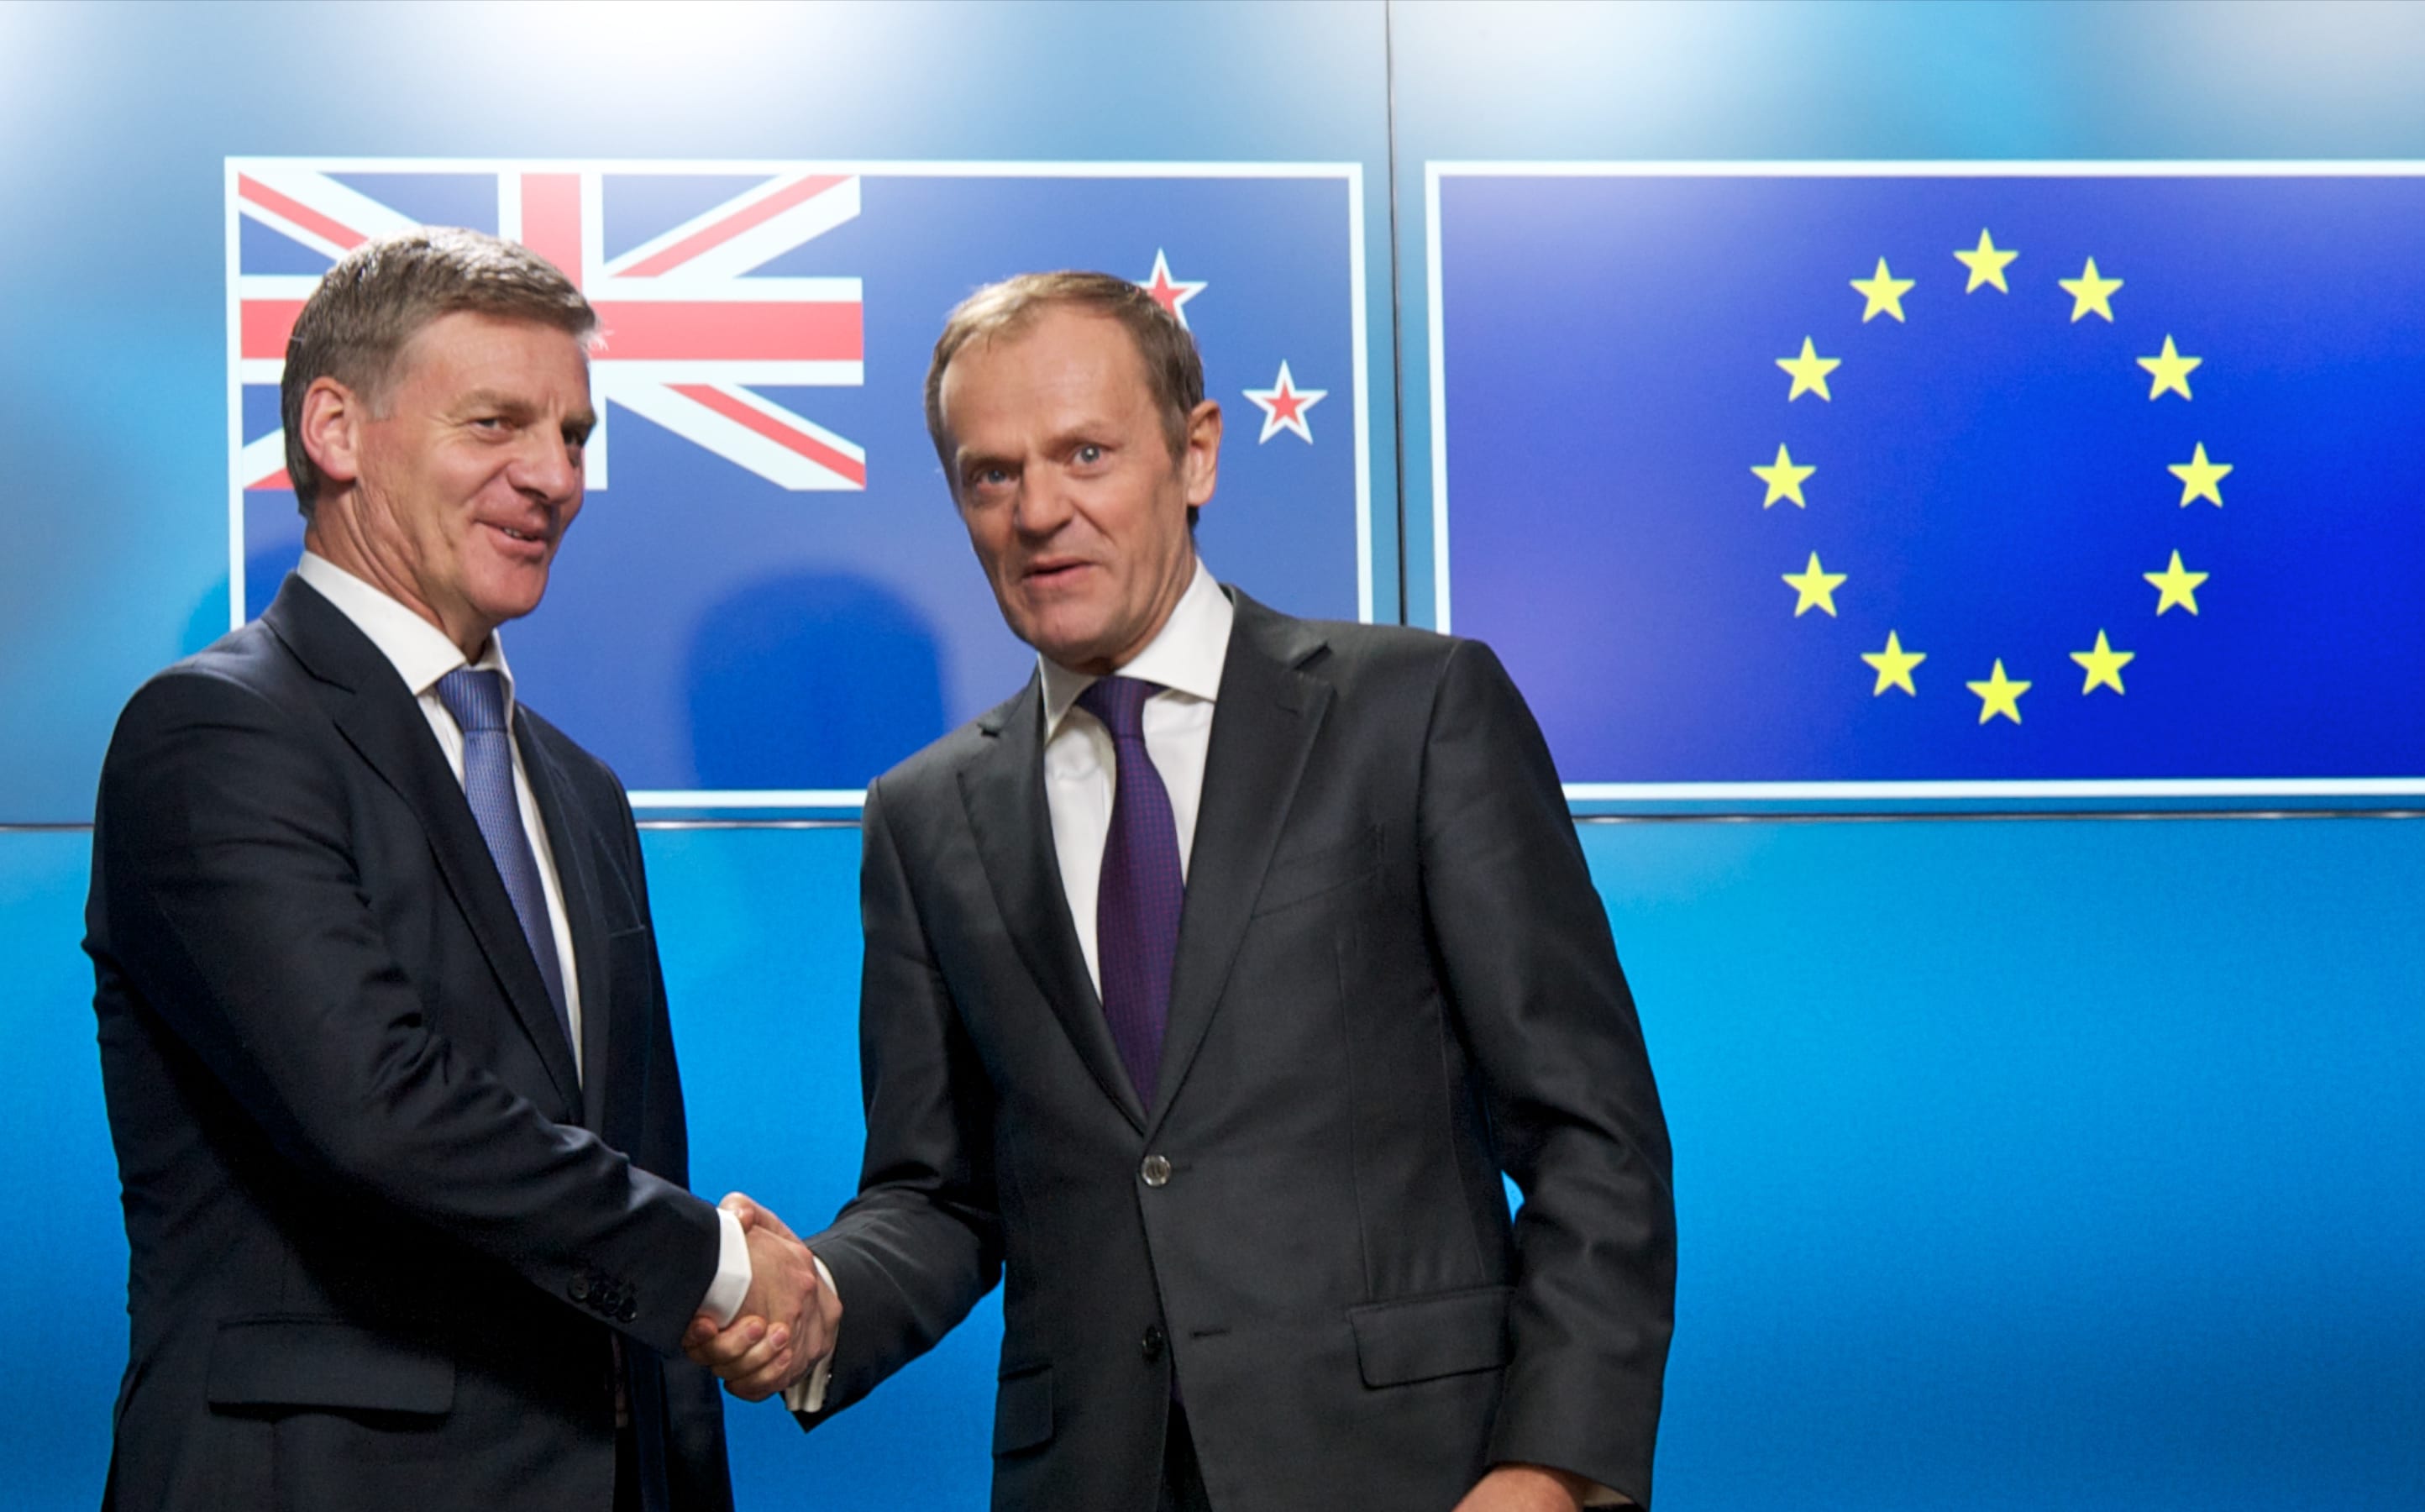 Bill English meets with Donald Tusk, President of the European Council.